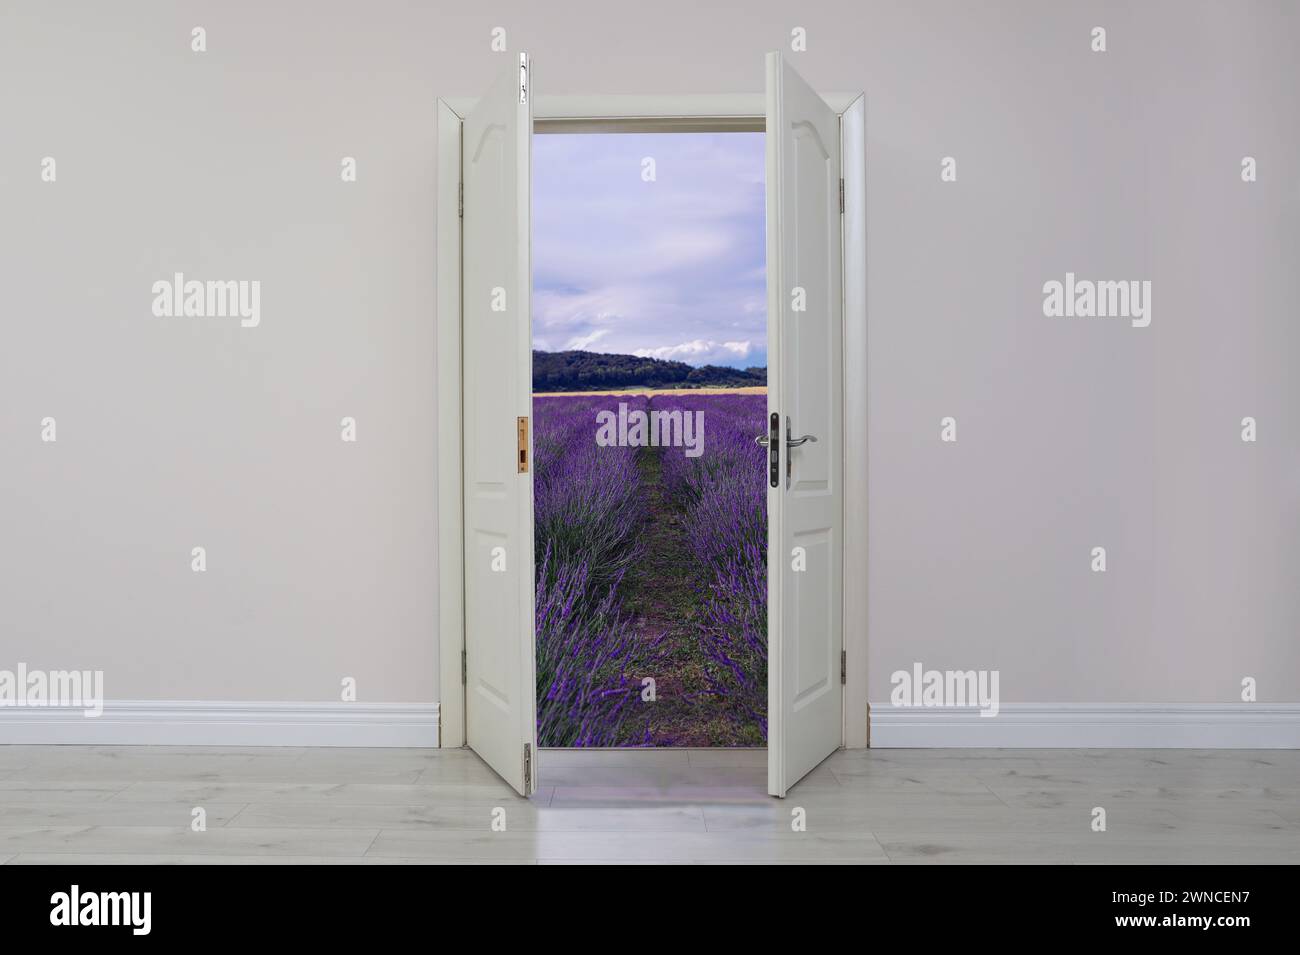 Open door in white wall inviting to visit lavender field Stock Photo